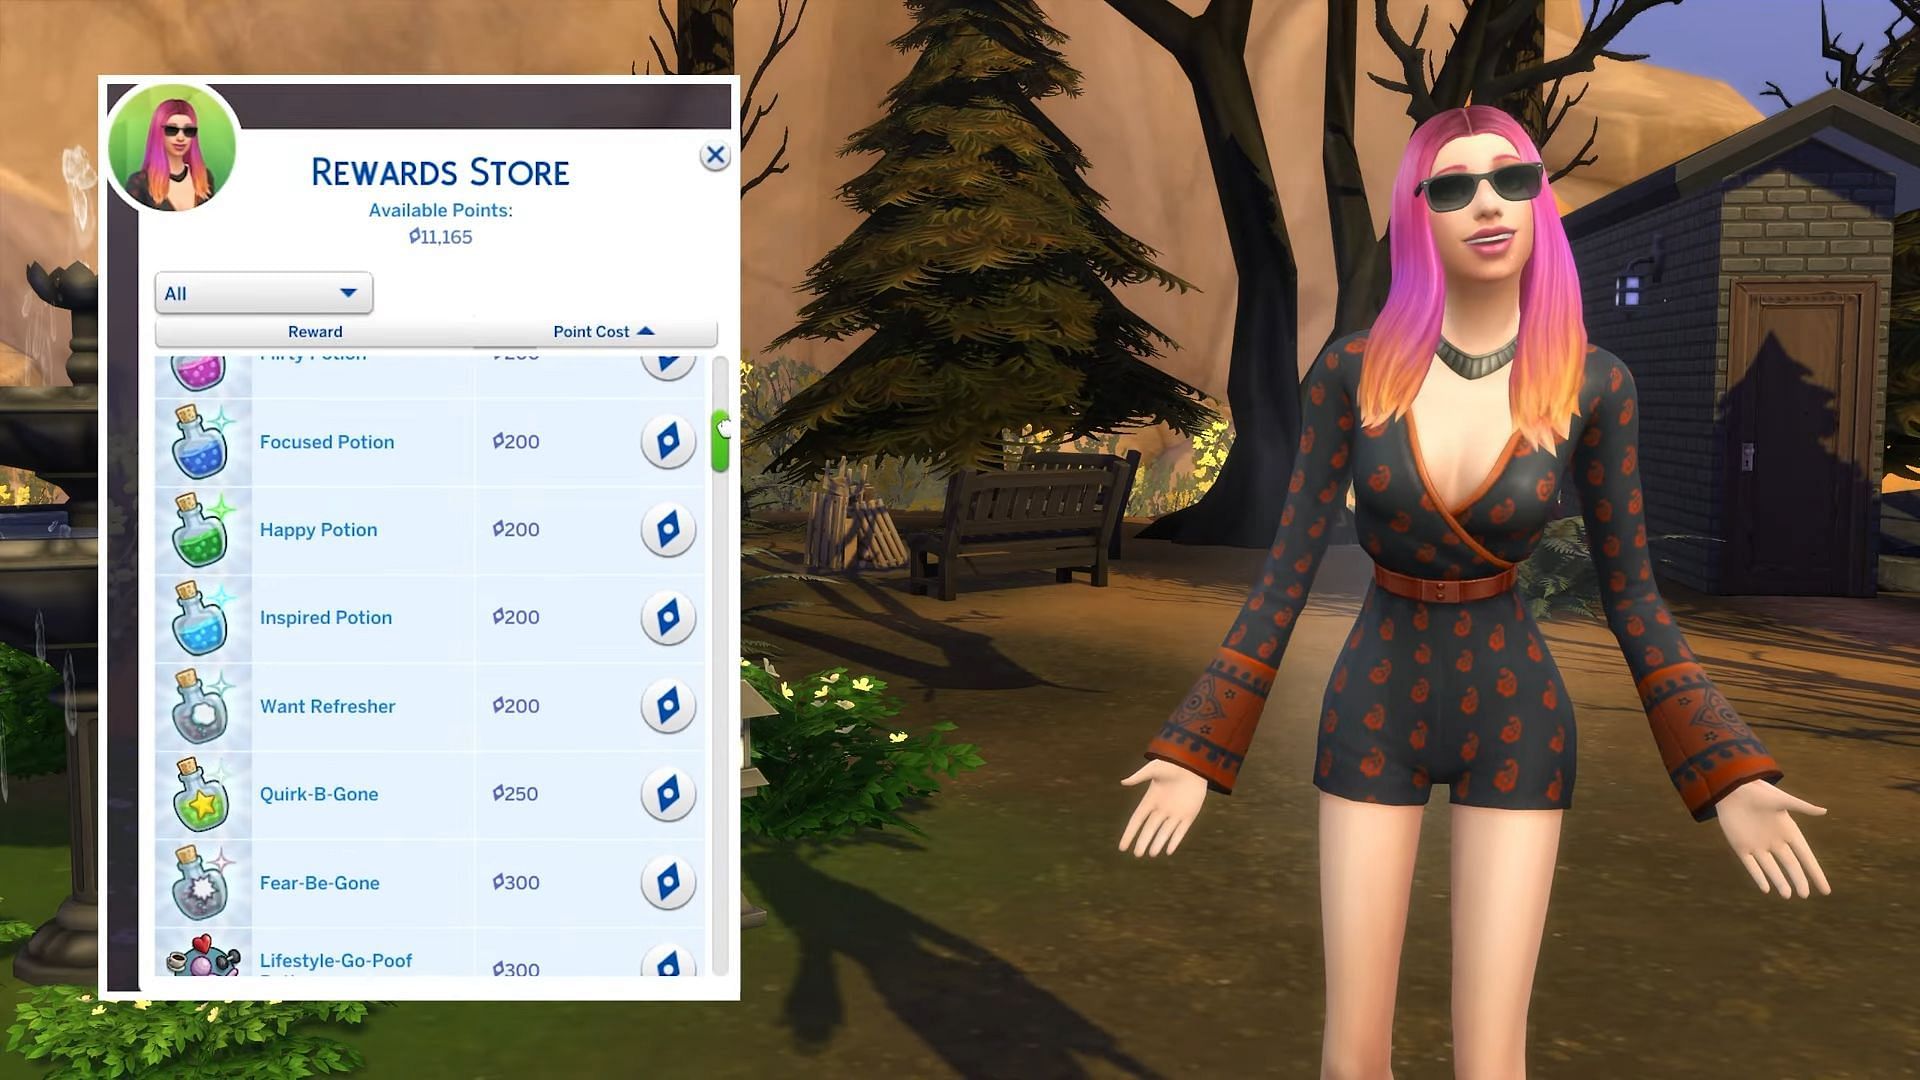 Buying rewards with The Sims 4 Satisfaction Point cheats (Image via YouTube/Petey Plays It)